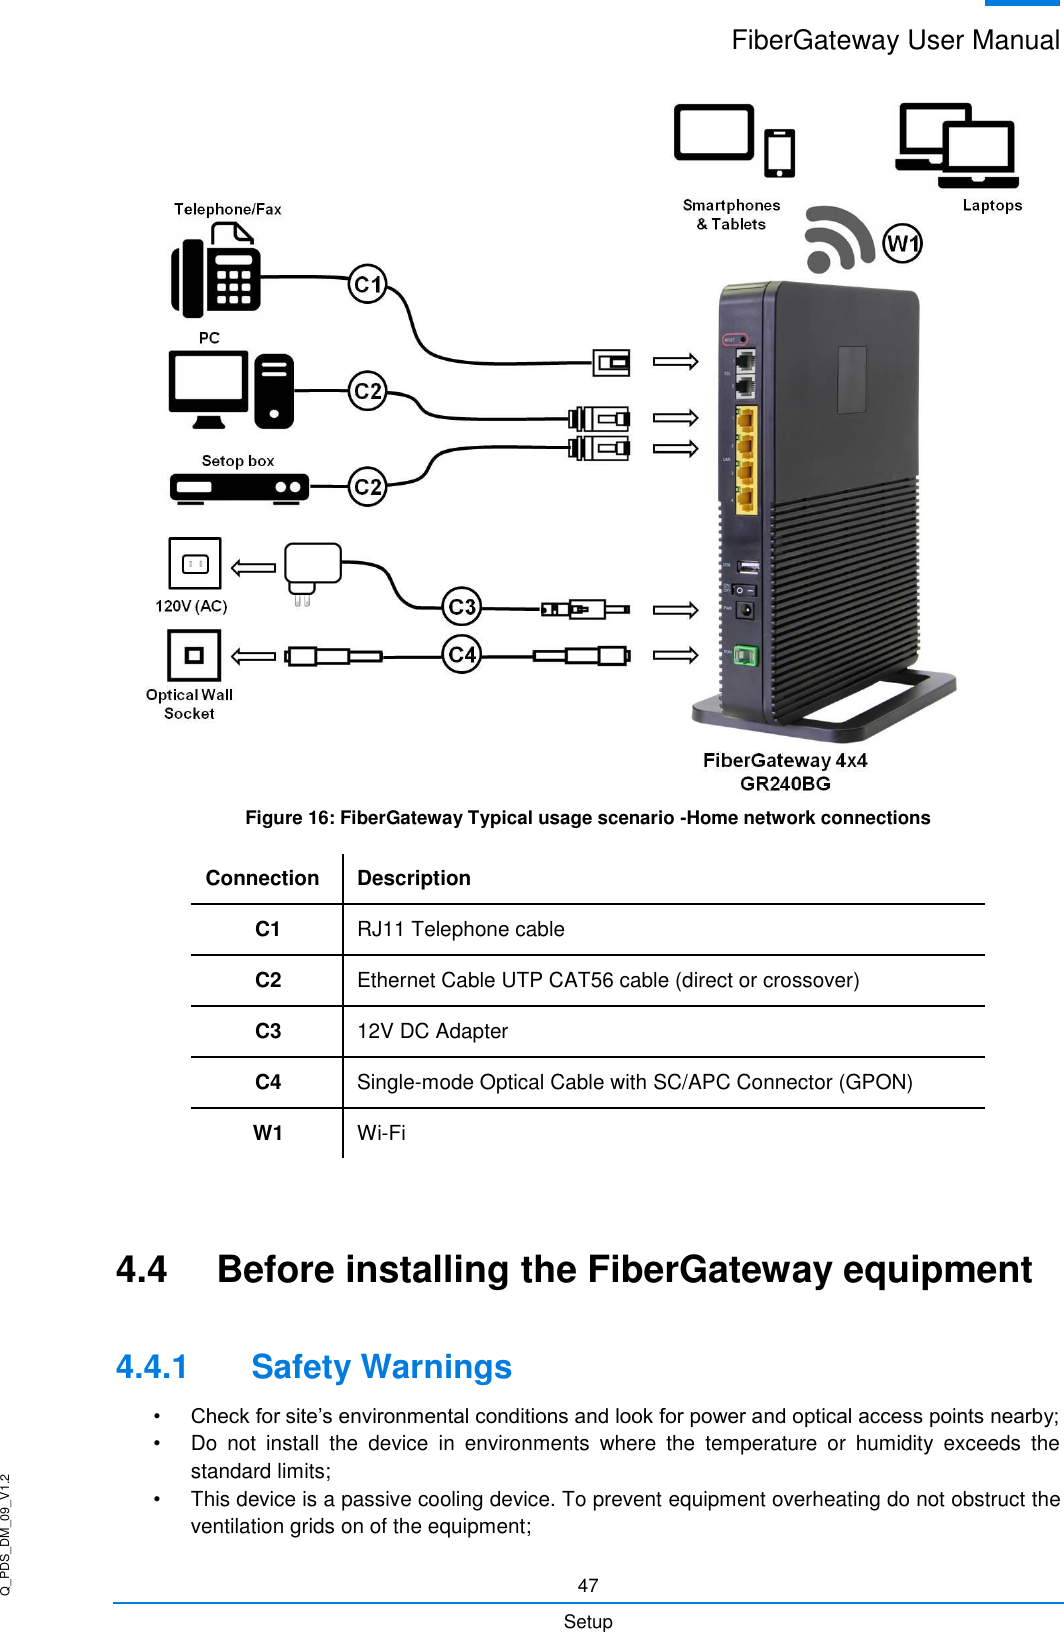 Q_PDS_DM_09_V1.2 FiberGateway User Manual  47 Setup  Figure 16: FiberGateway Typical usage scenario -Home network connections Connection Description C1 RJ11 Telephone cable C2 Ethernet Cable UTP CAT56 cable (direct or crossover)  C3 12V DC Adapter  C4 Single-mode Optical Cable with SC/APC Connector (GPON) W1 Wi-Fi  4.4  Before installing the FiberGateway equipment 4.4.1  Safety Warnings • Check for site’s environmental conditions and look for power and optical access points nearby; •  Do  not  install  the  device  in  environments  where  the  temperature  or  humidity  exceeds  the standard limits; •  This device is a passive cooling device. To prevent equipment overheating do not obstruct the ventilation grids on of the equipment; 